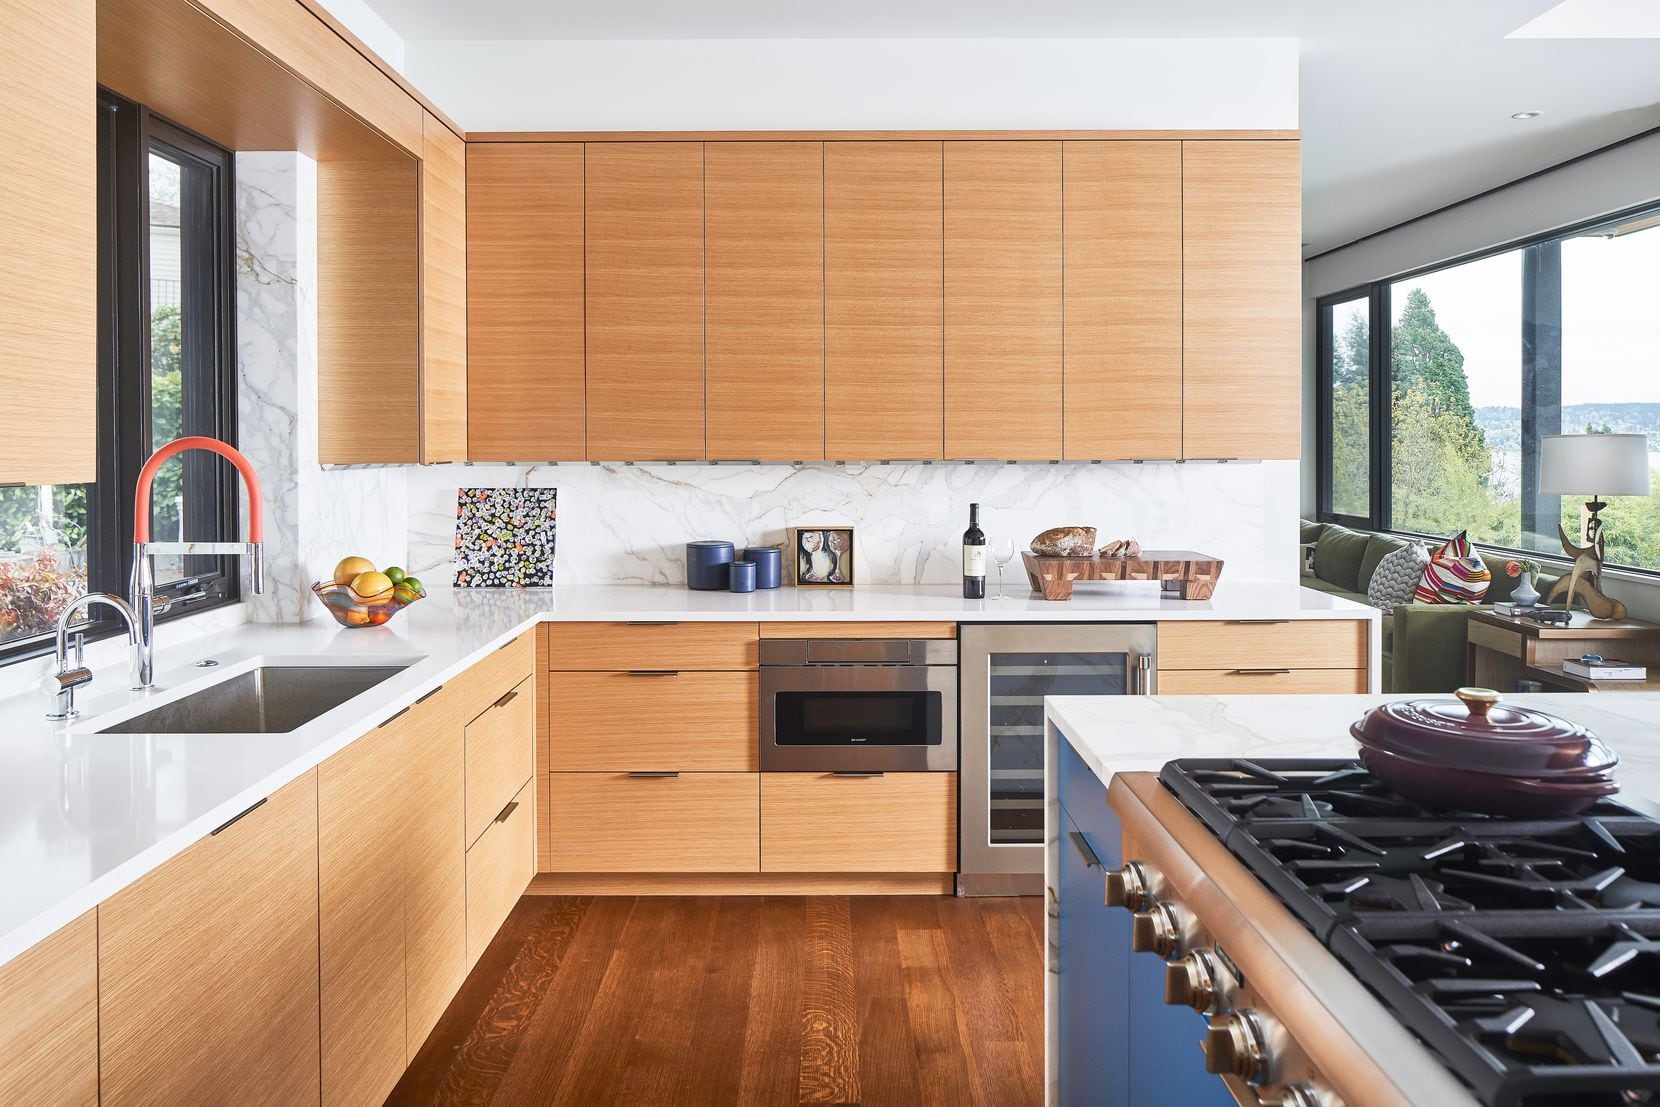 A kitchen features warm wood details on the cabinets.